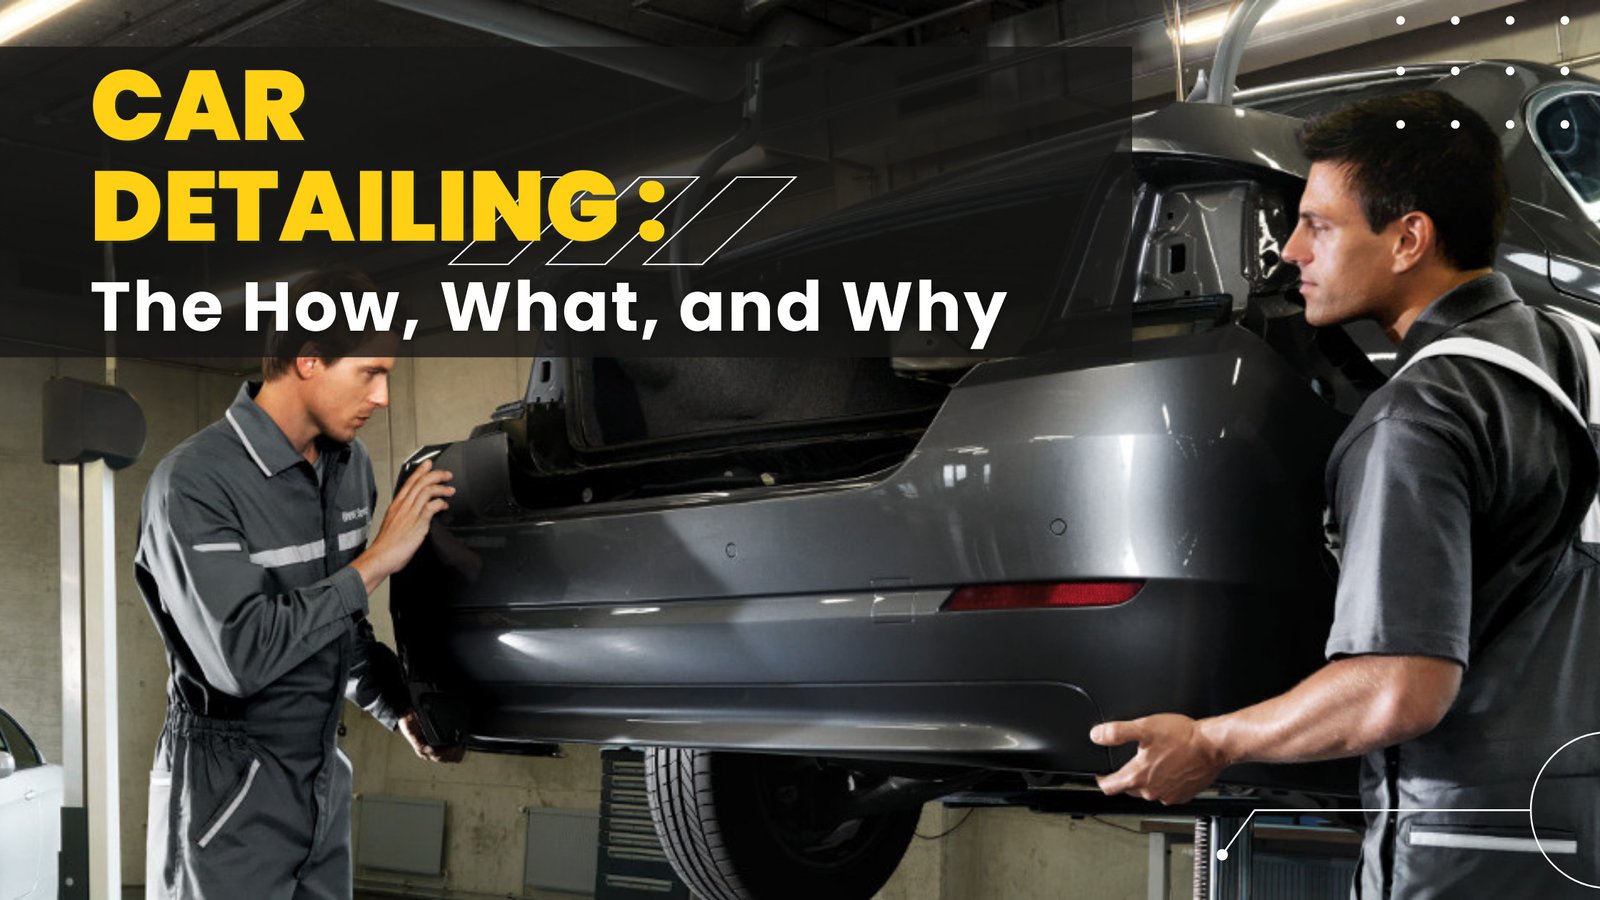 Car Detailing: The How, What, and Why